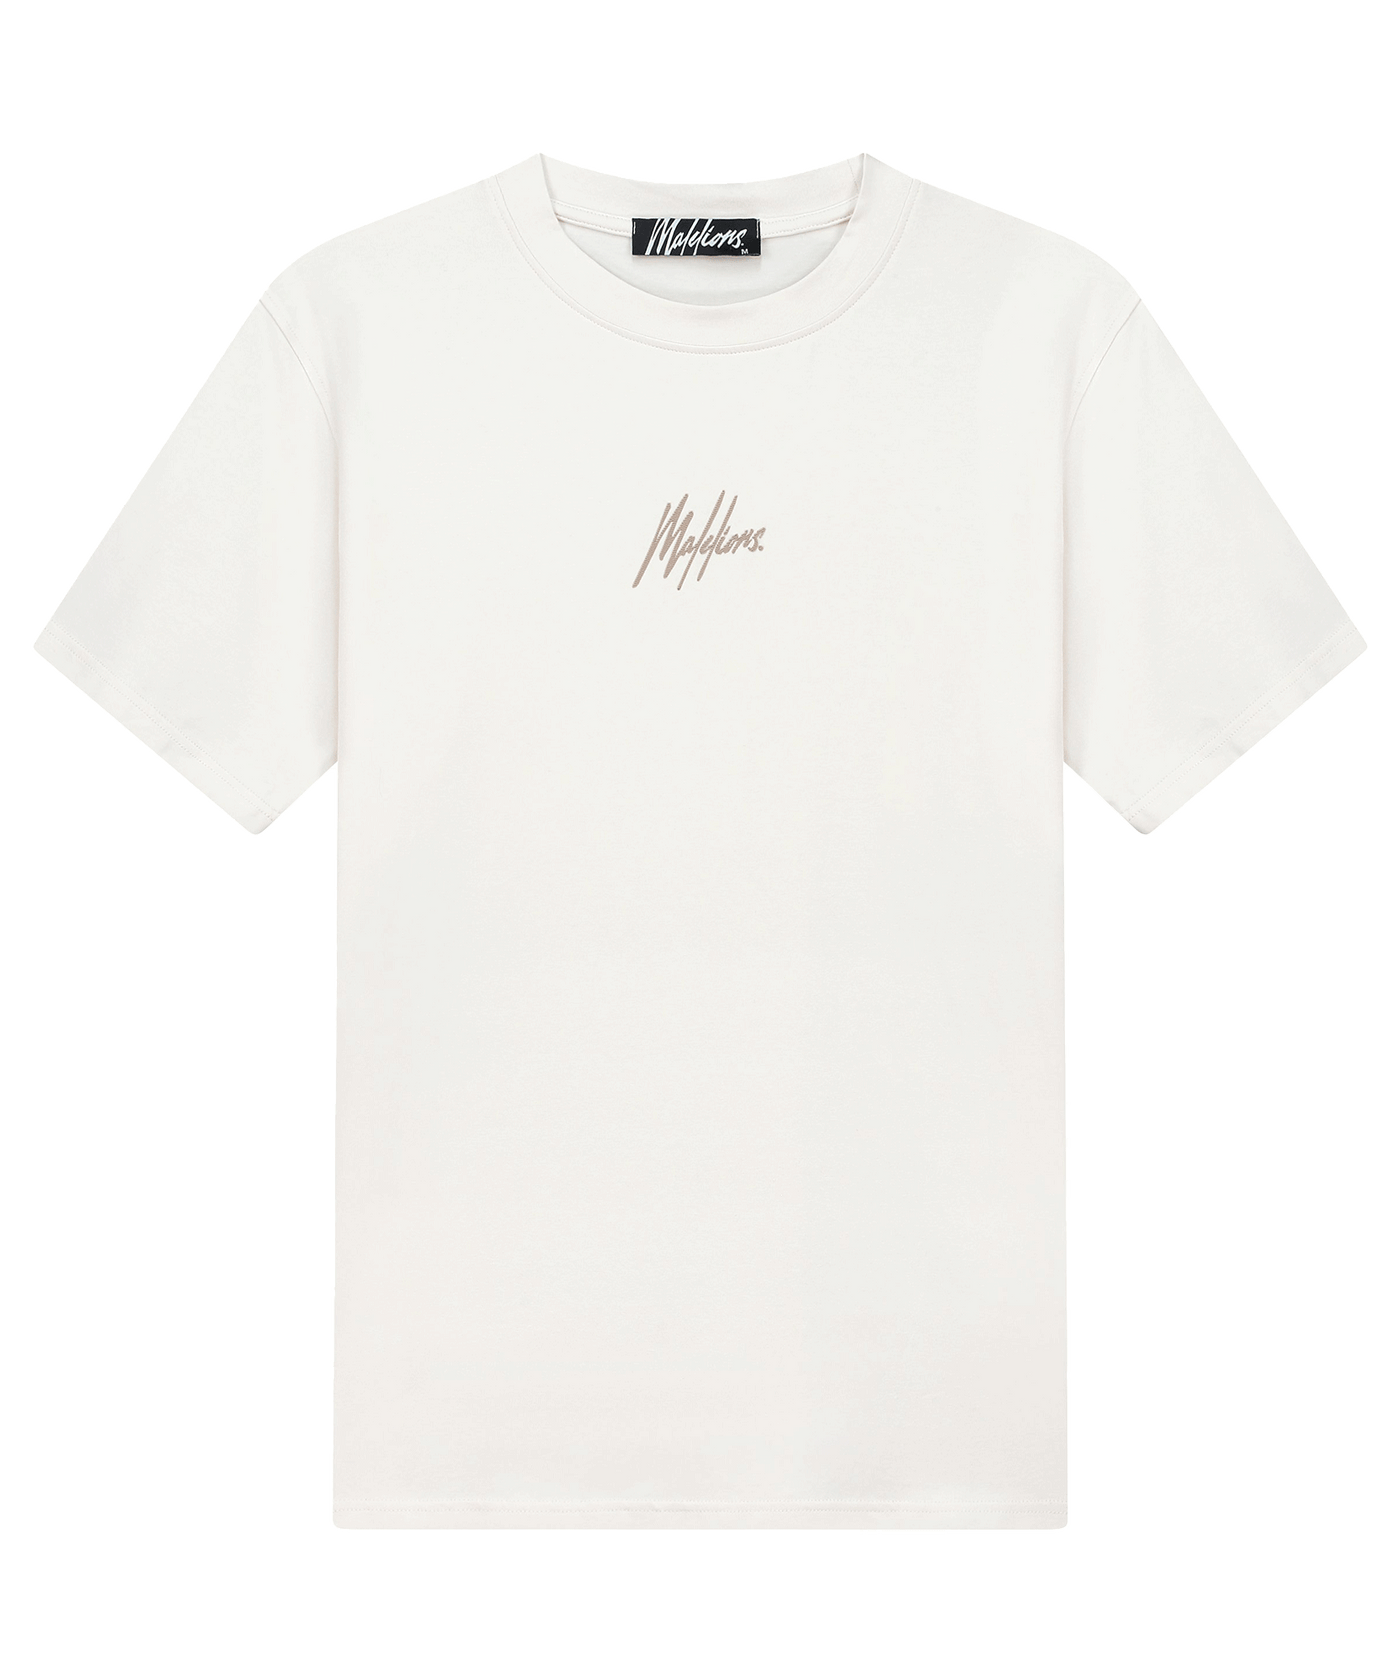 Malelions - Striped Signature - T-shirt - Offwhite/taupe